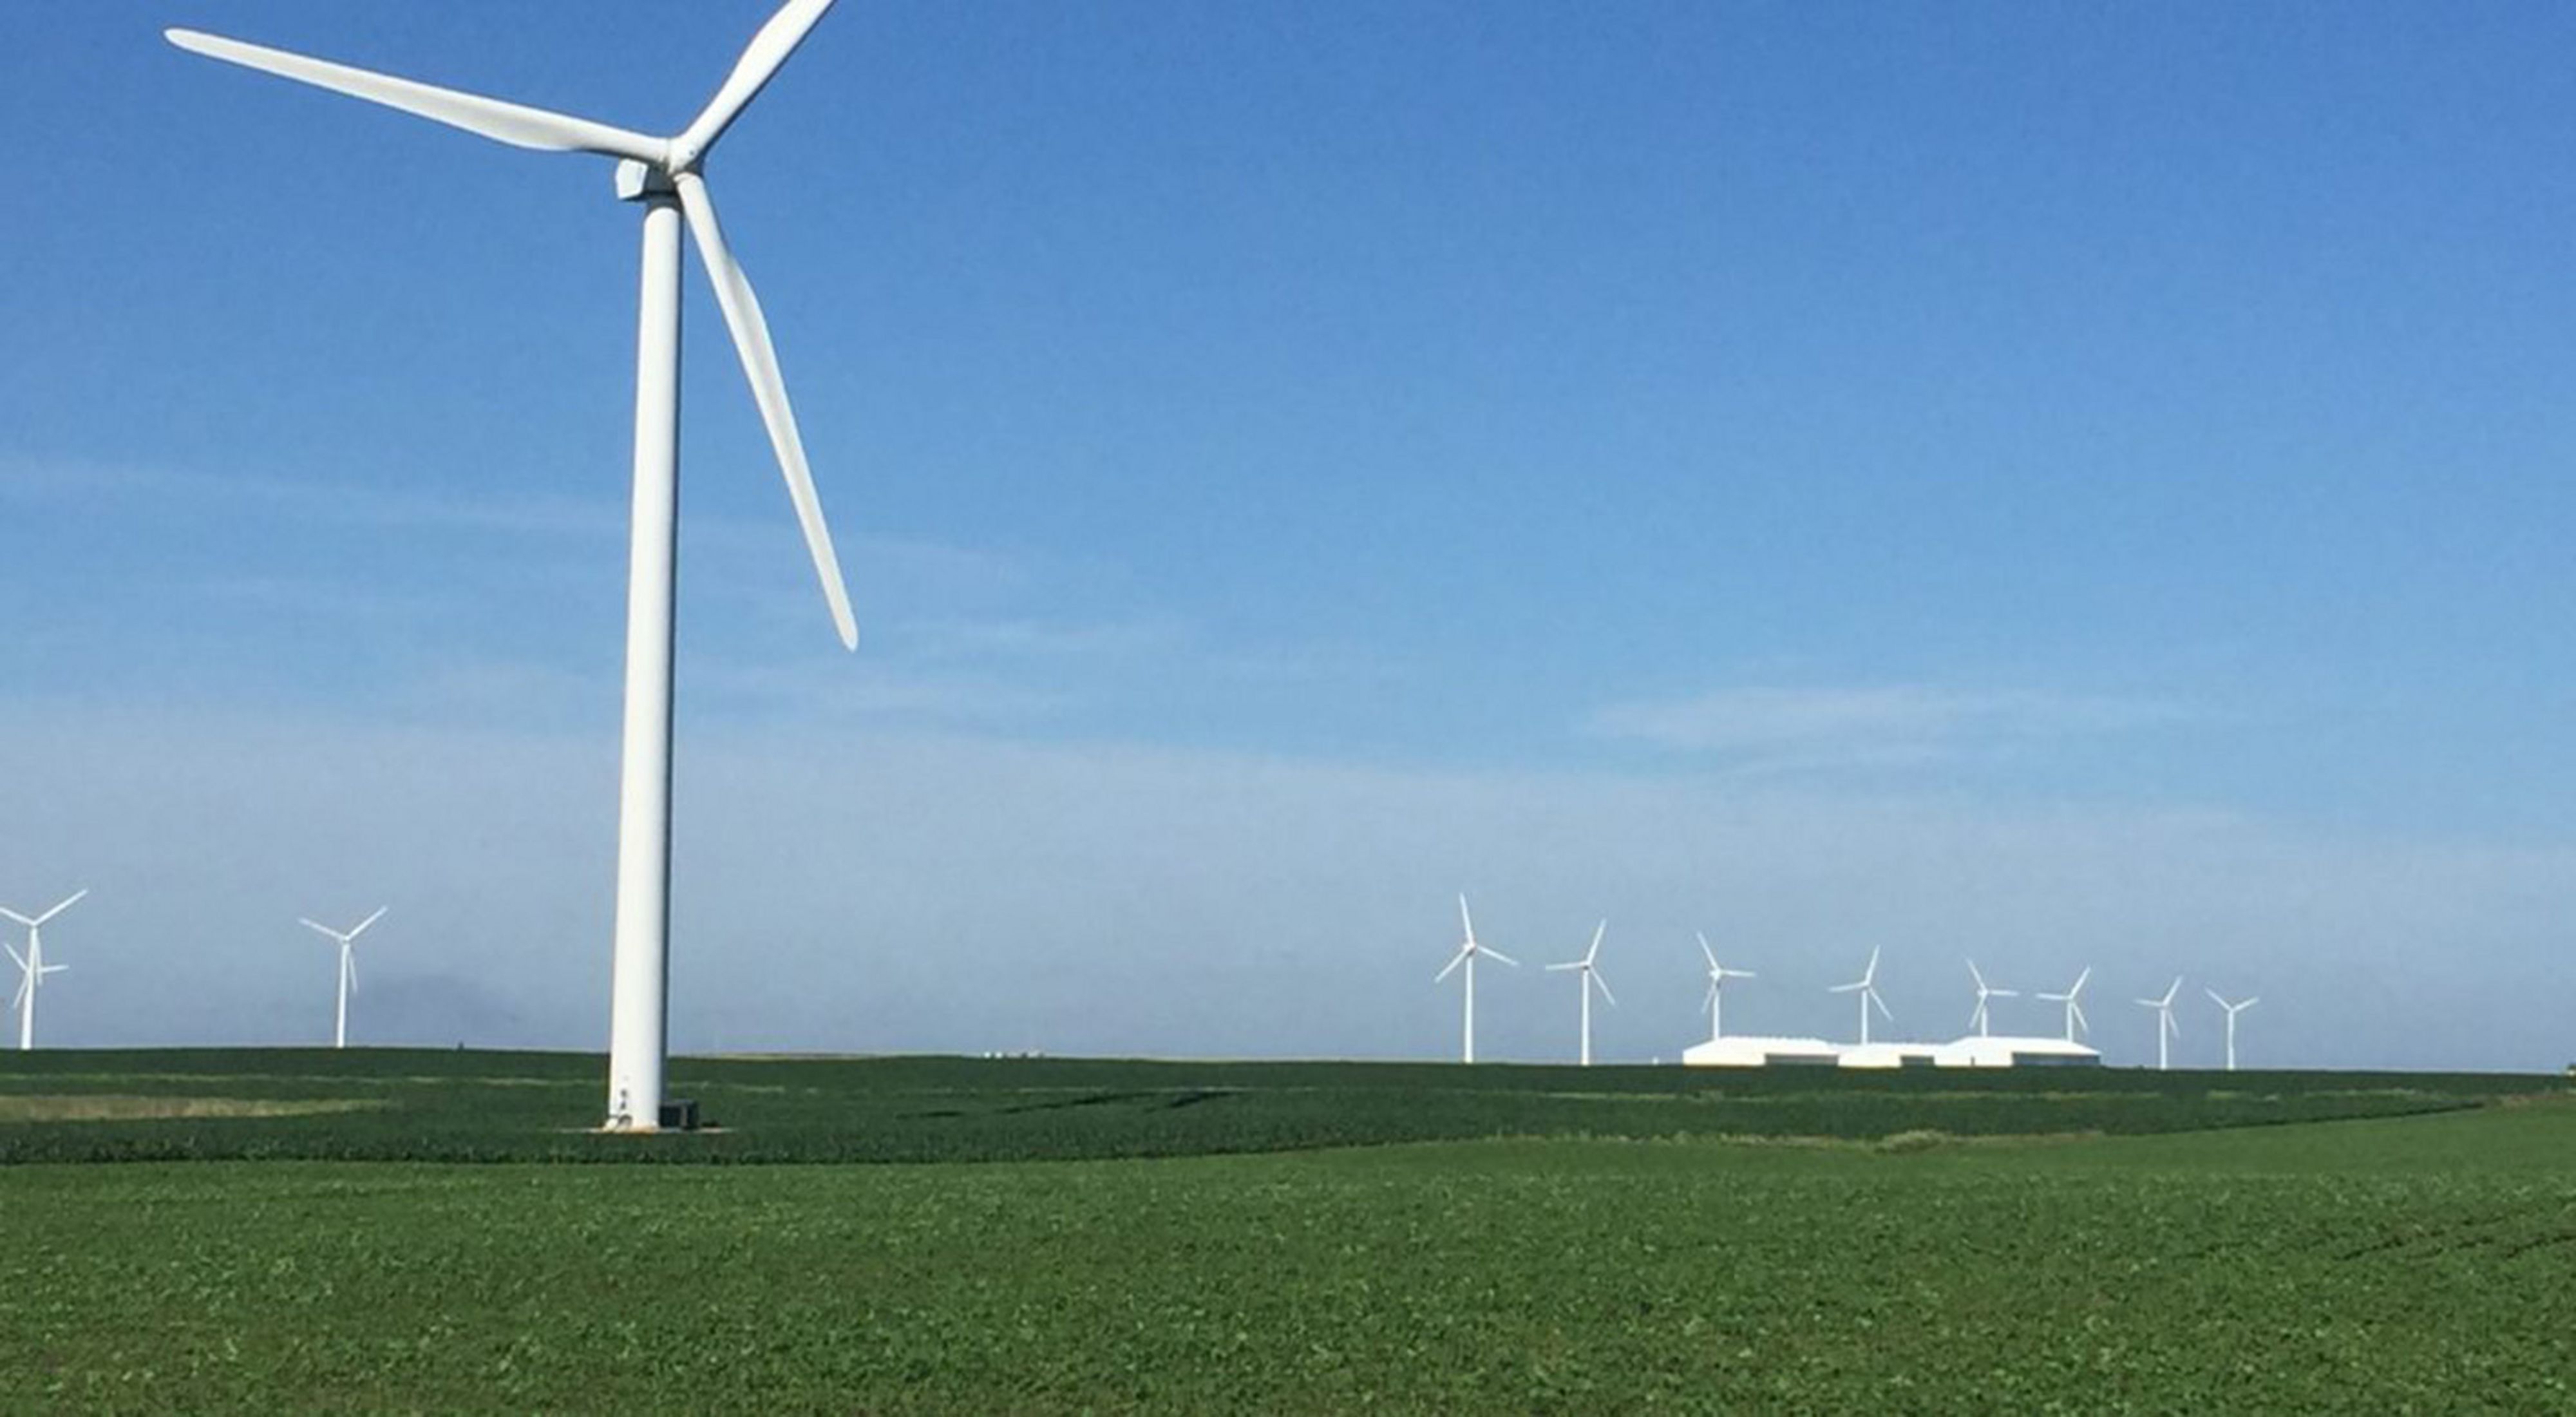 Photo of a wind turbine in a broad, flat Iowa field, with other turbines in background.